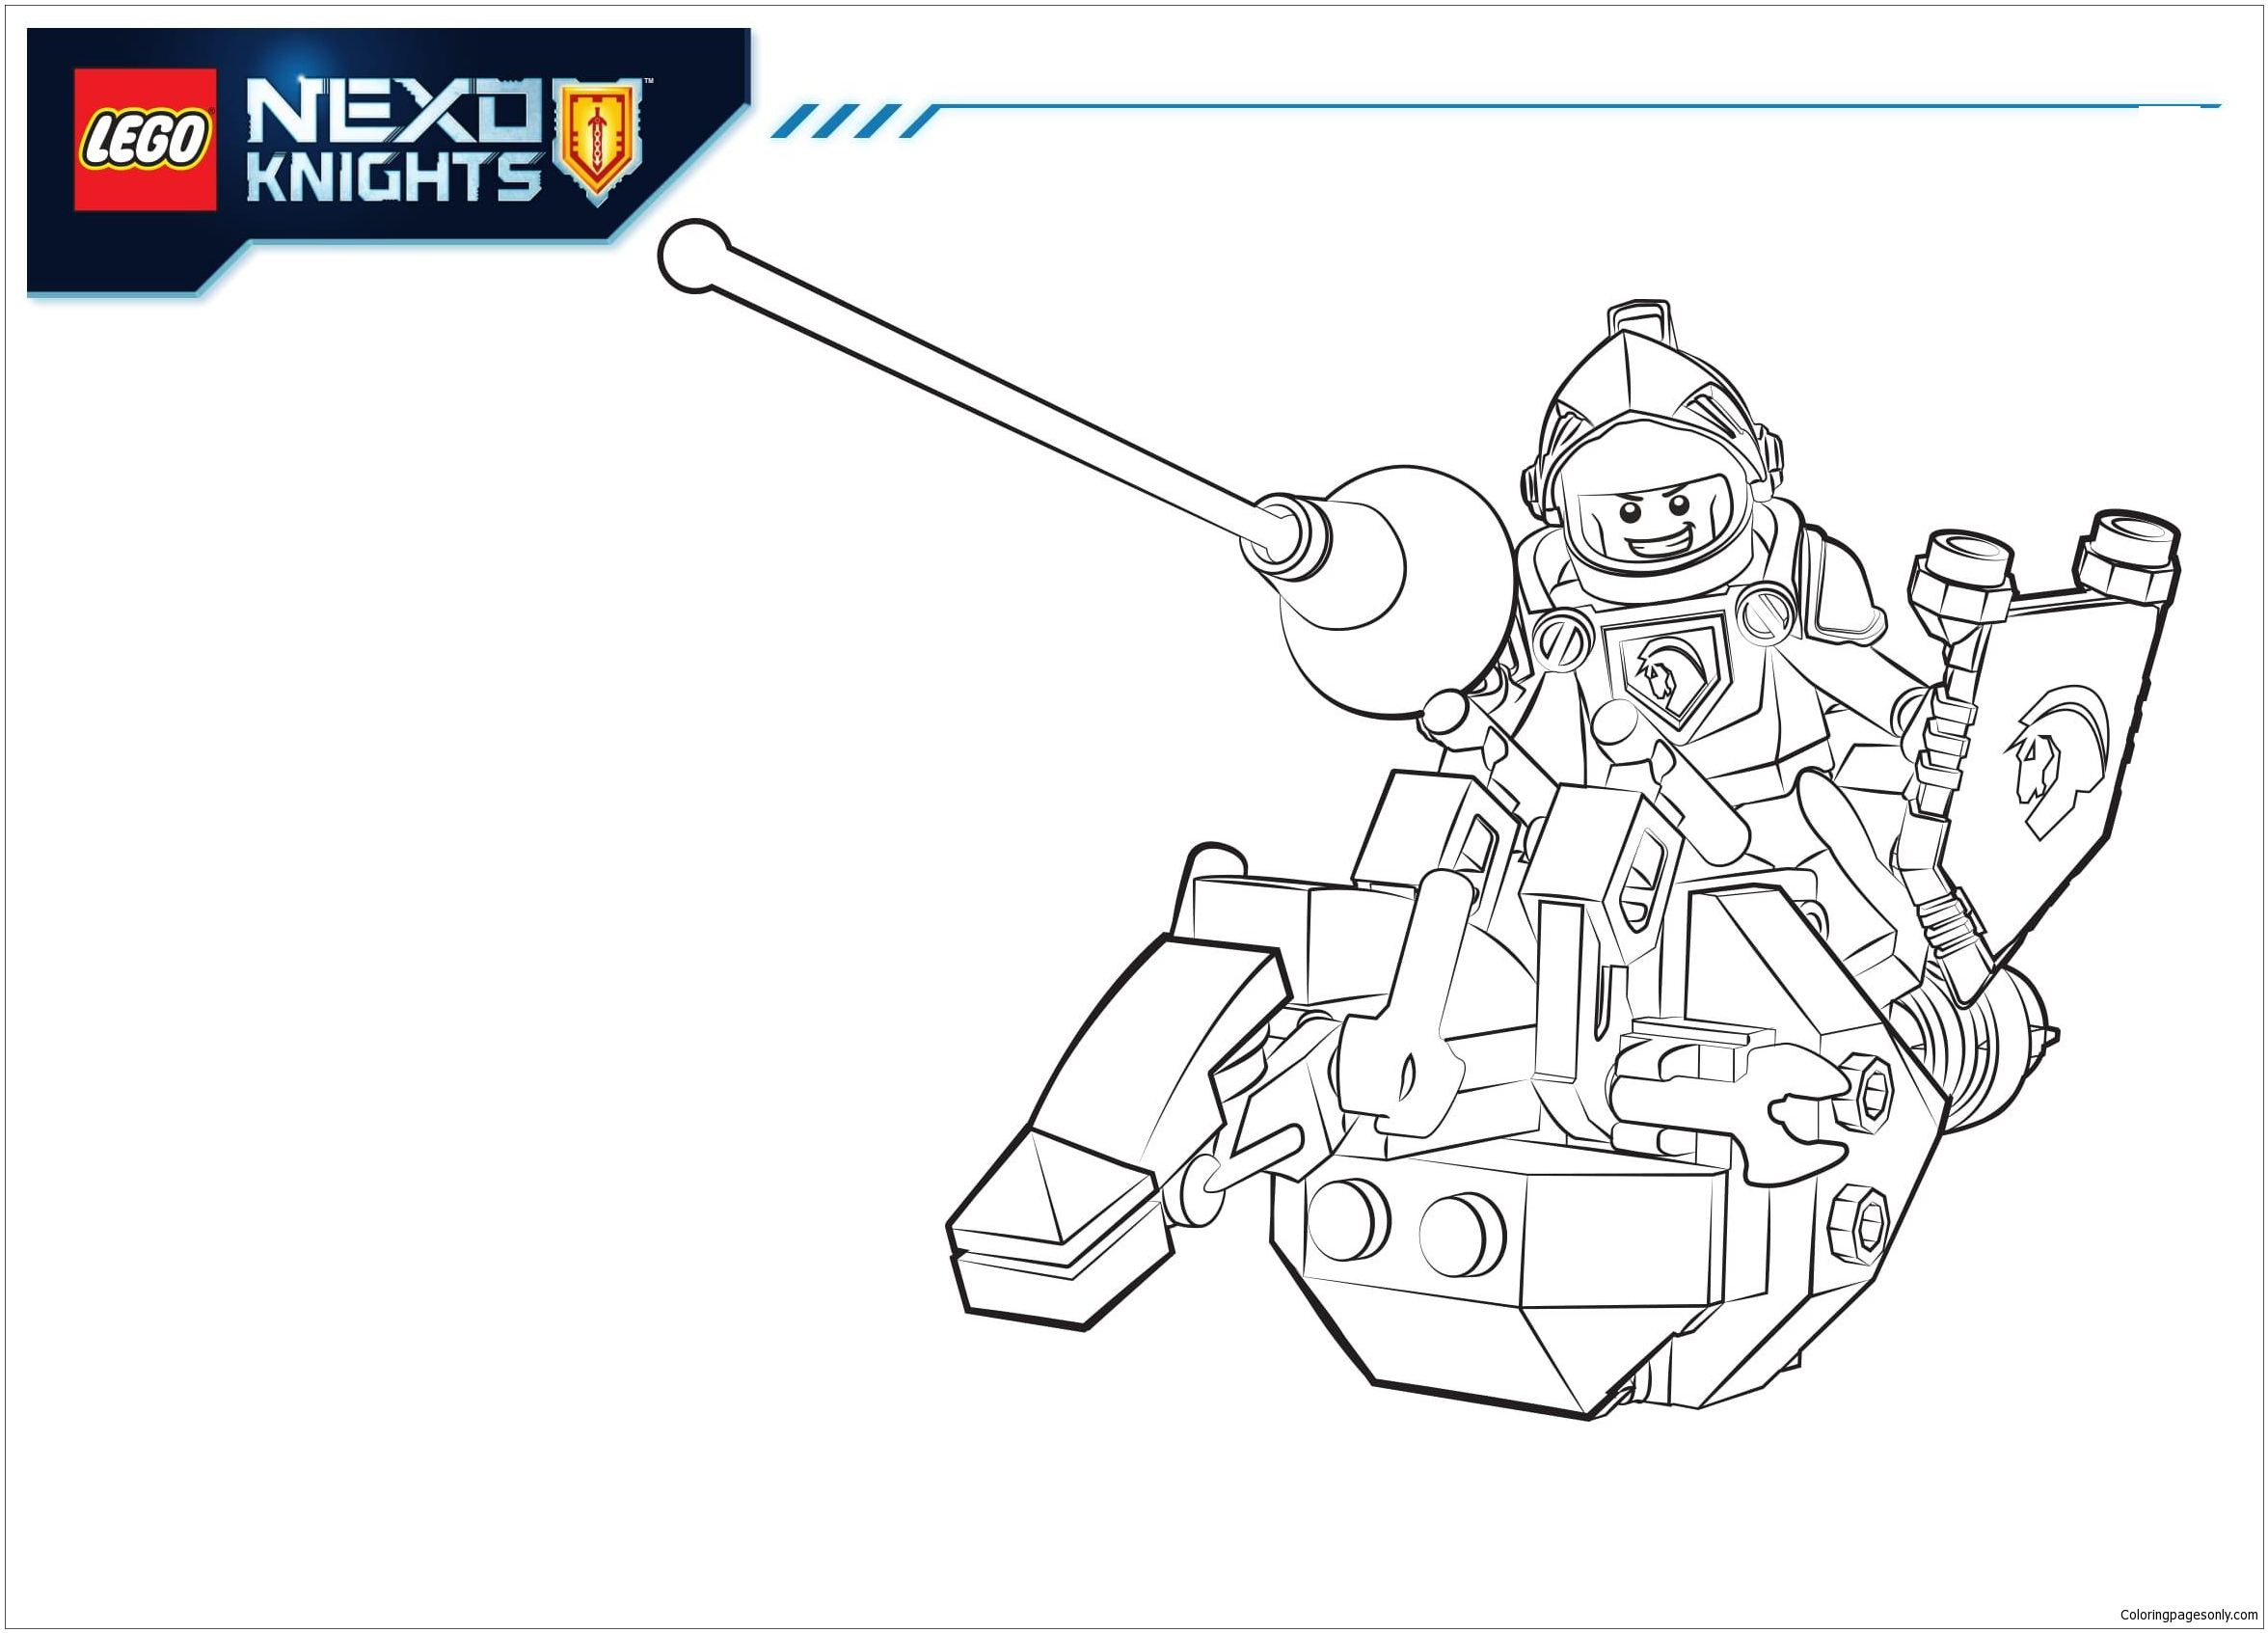 Knights Coloring Pages Lego Nexo Knights Lance Coloring Page Free Coloring Pages Online